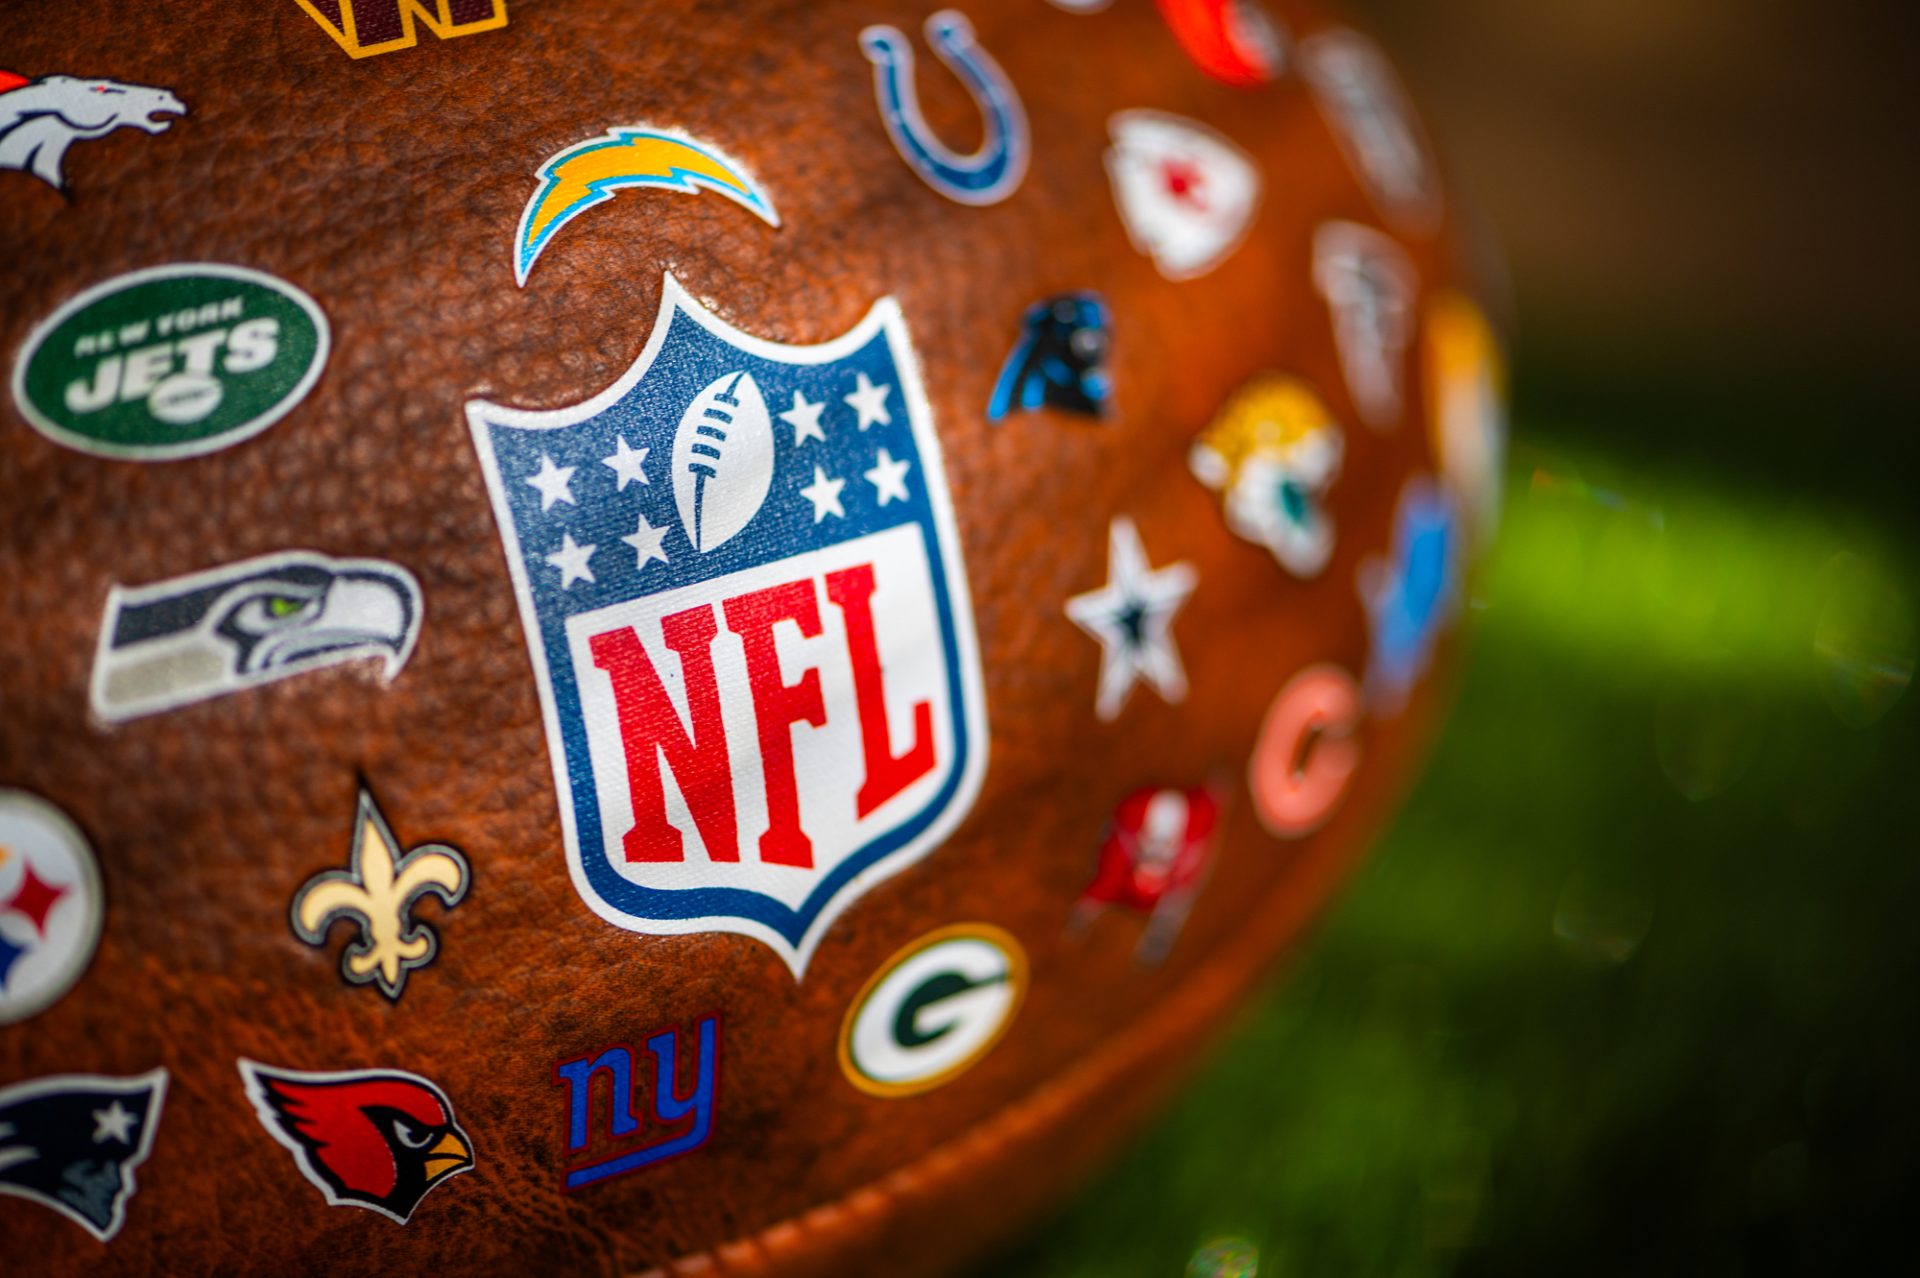 Is the NFL bigger than the NBA?